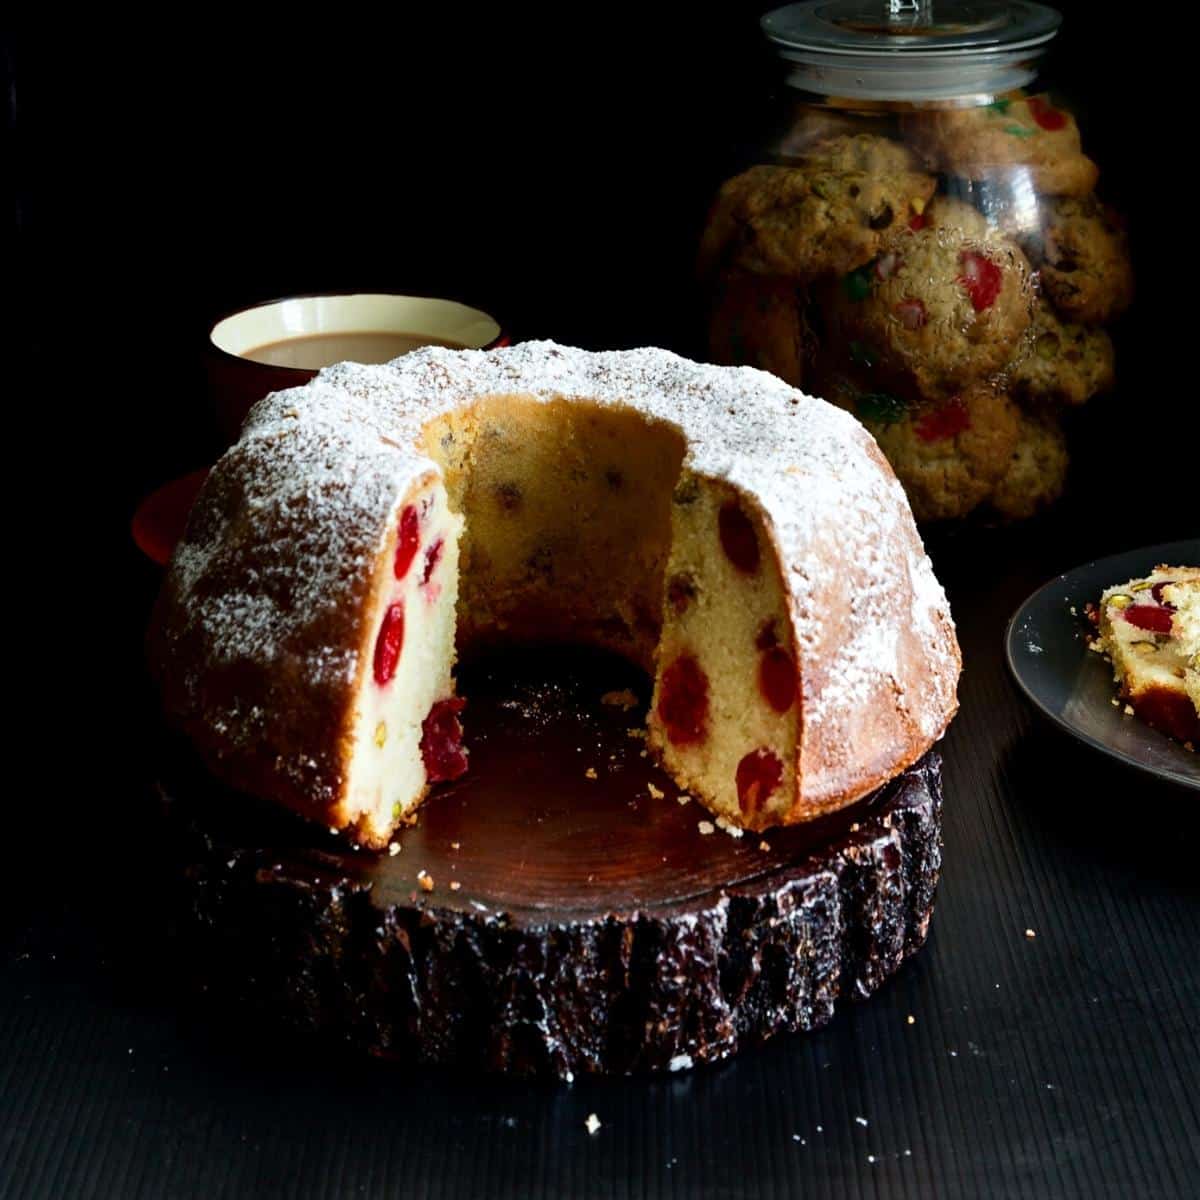 A bundt cake with cherries on a wooden board.